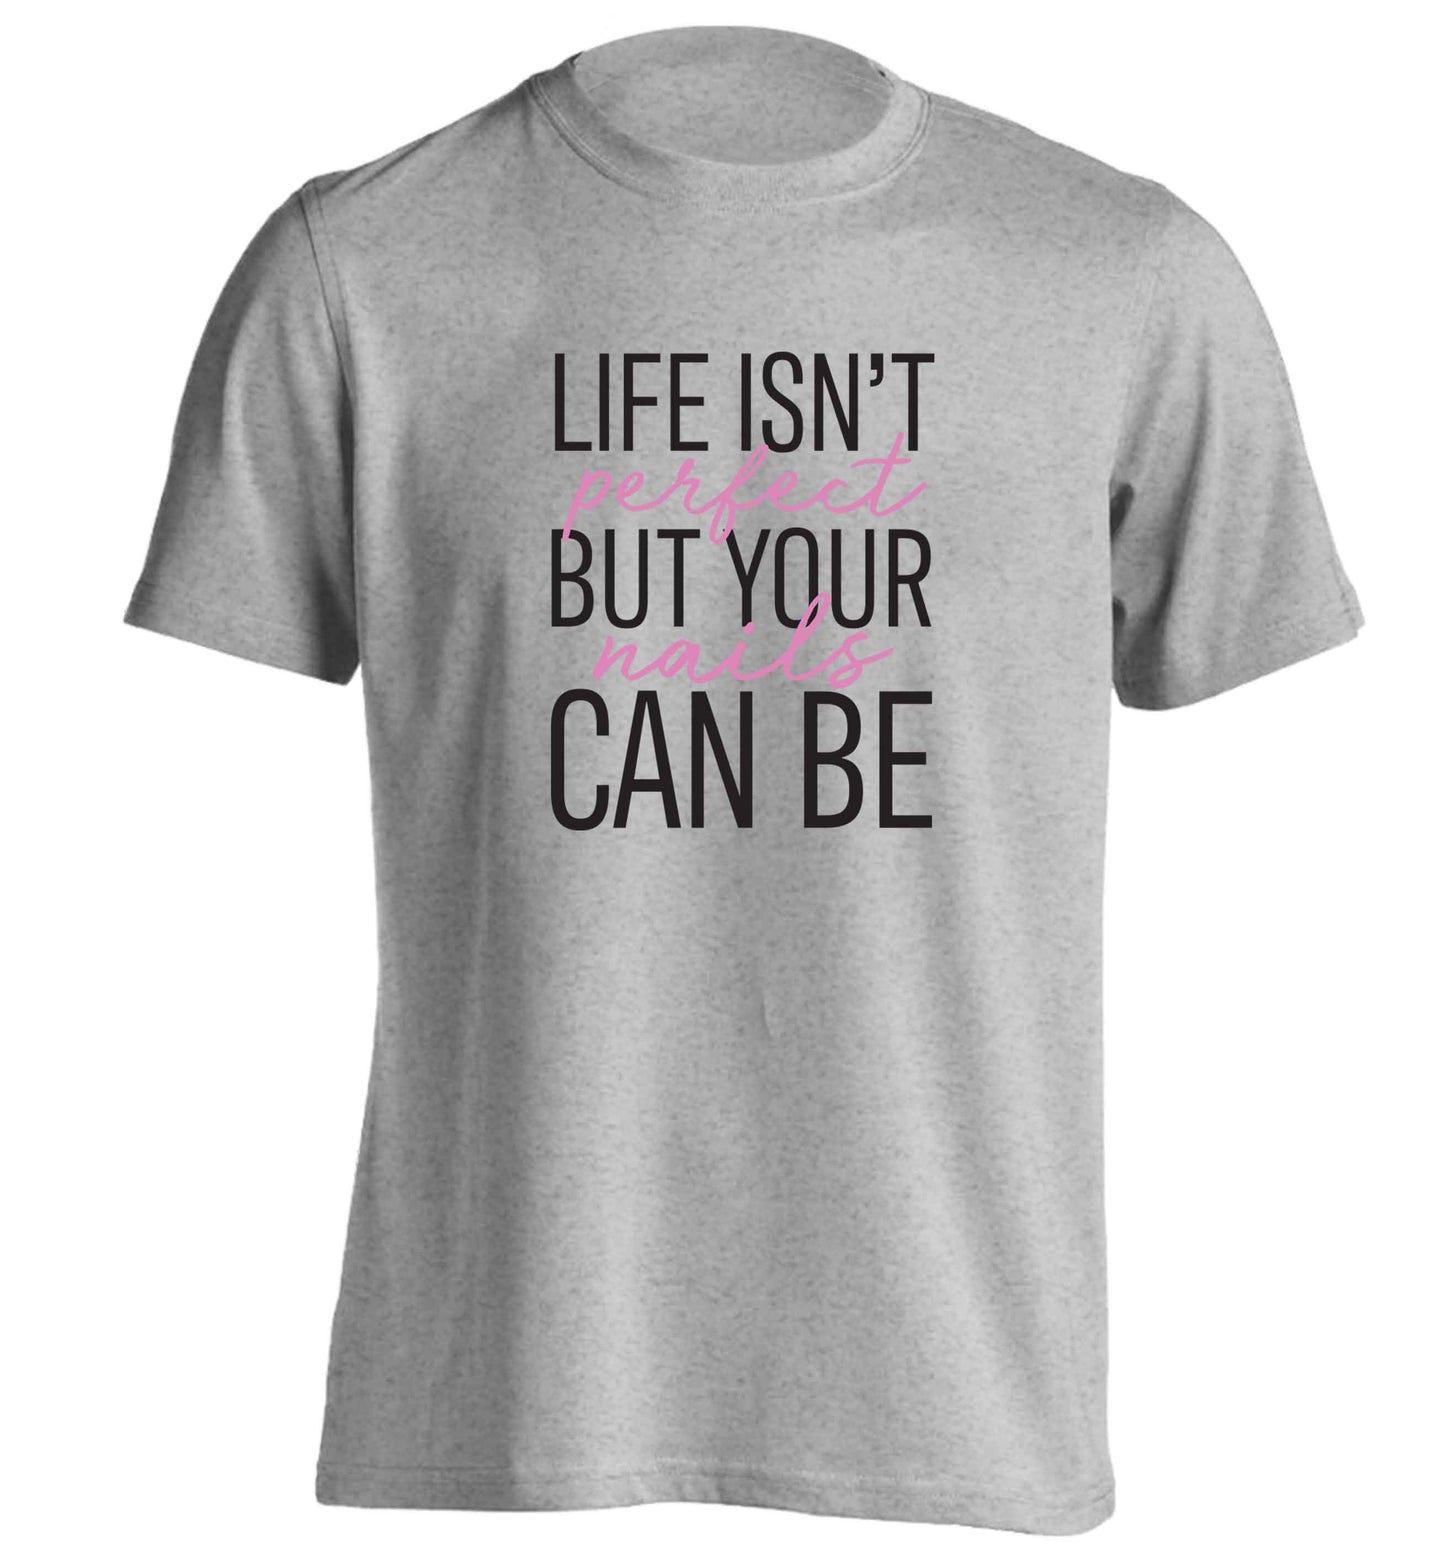 Life isn't perfect but your nails can be adults unisex grey Tshirt 2XL